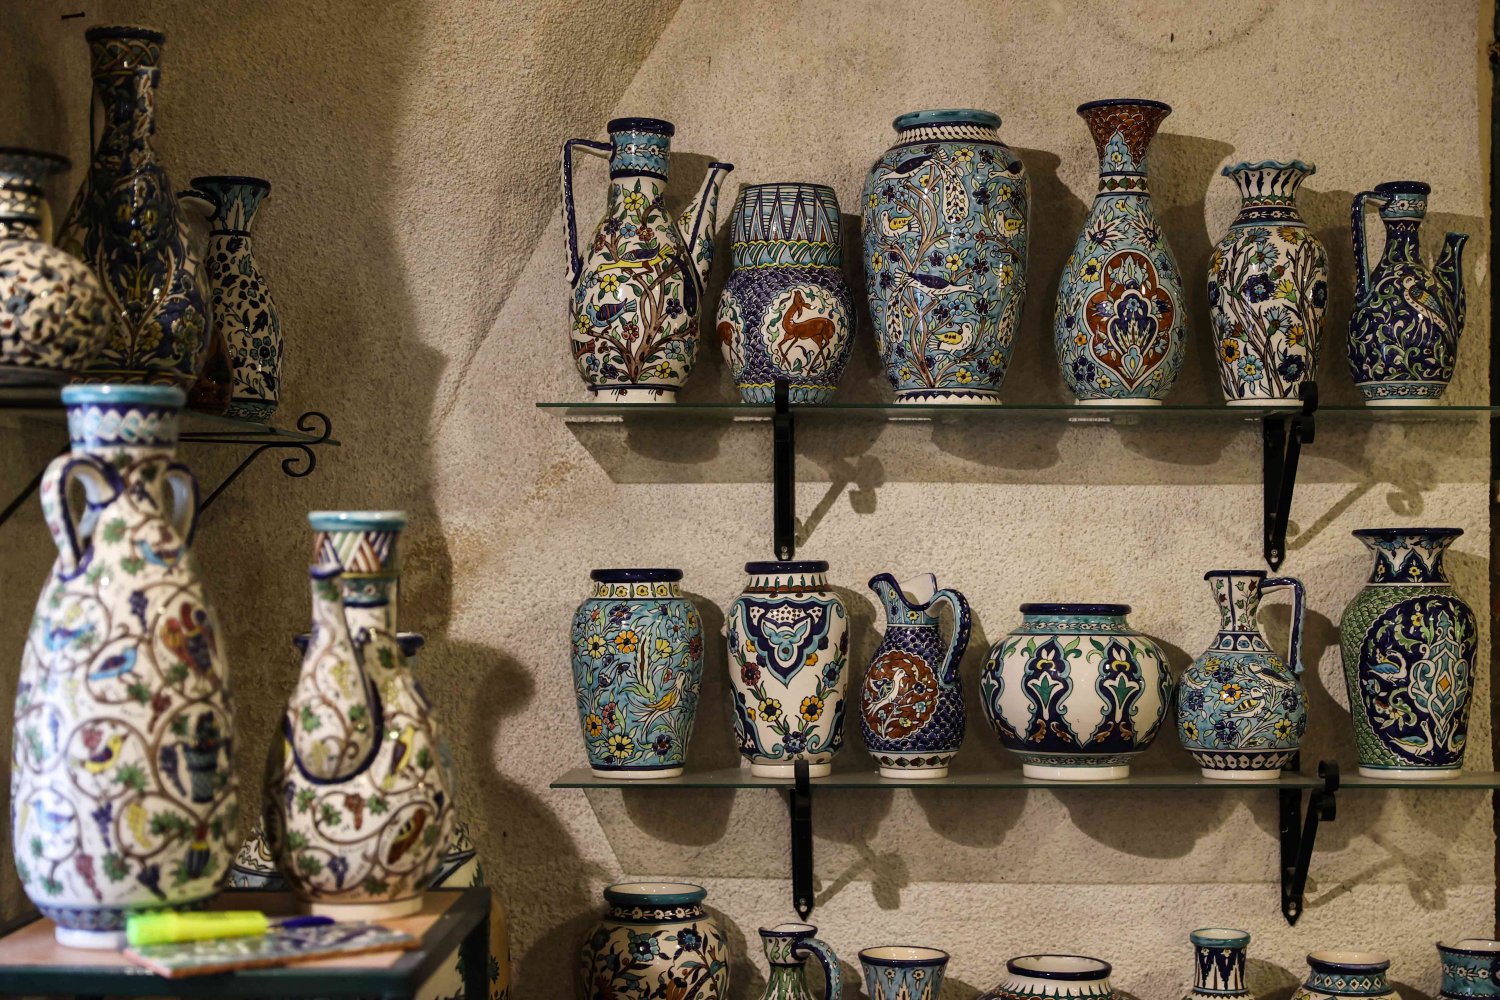 The Balian studio museum displays historic ceramic art pieces from 100 years of Armenian pottery artistry in Jerusalem